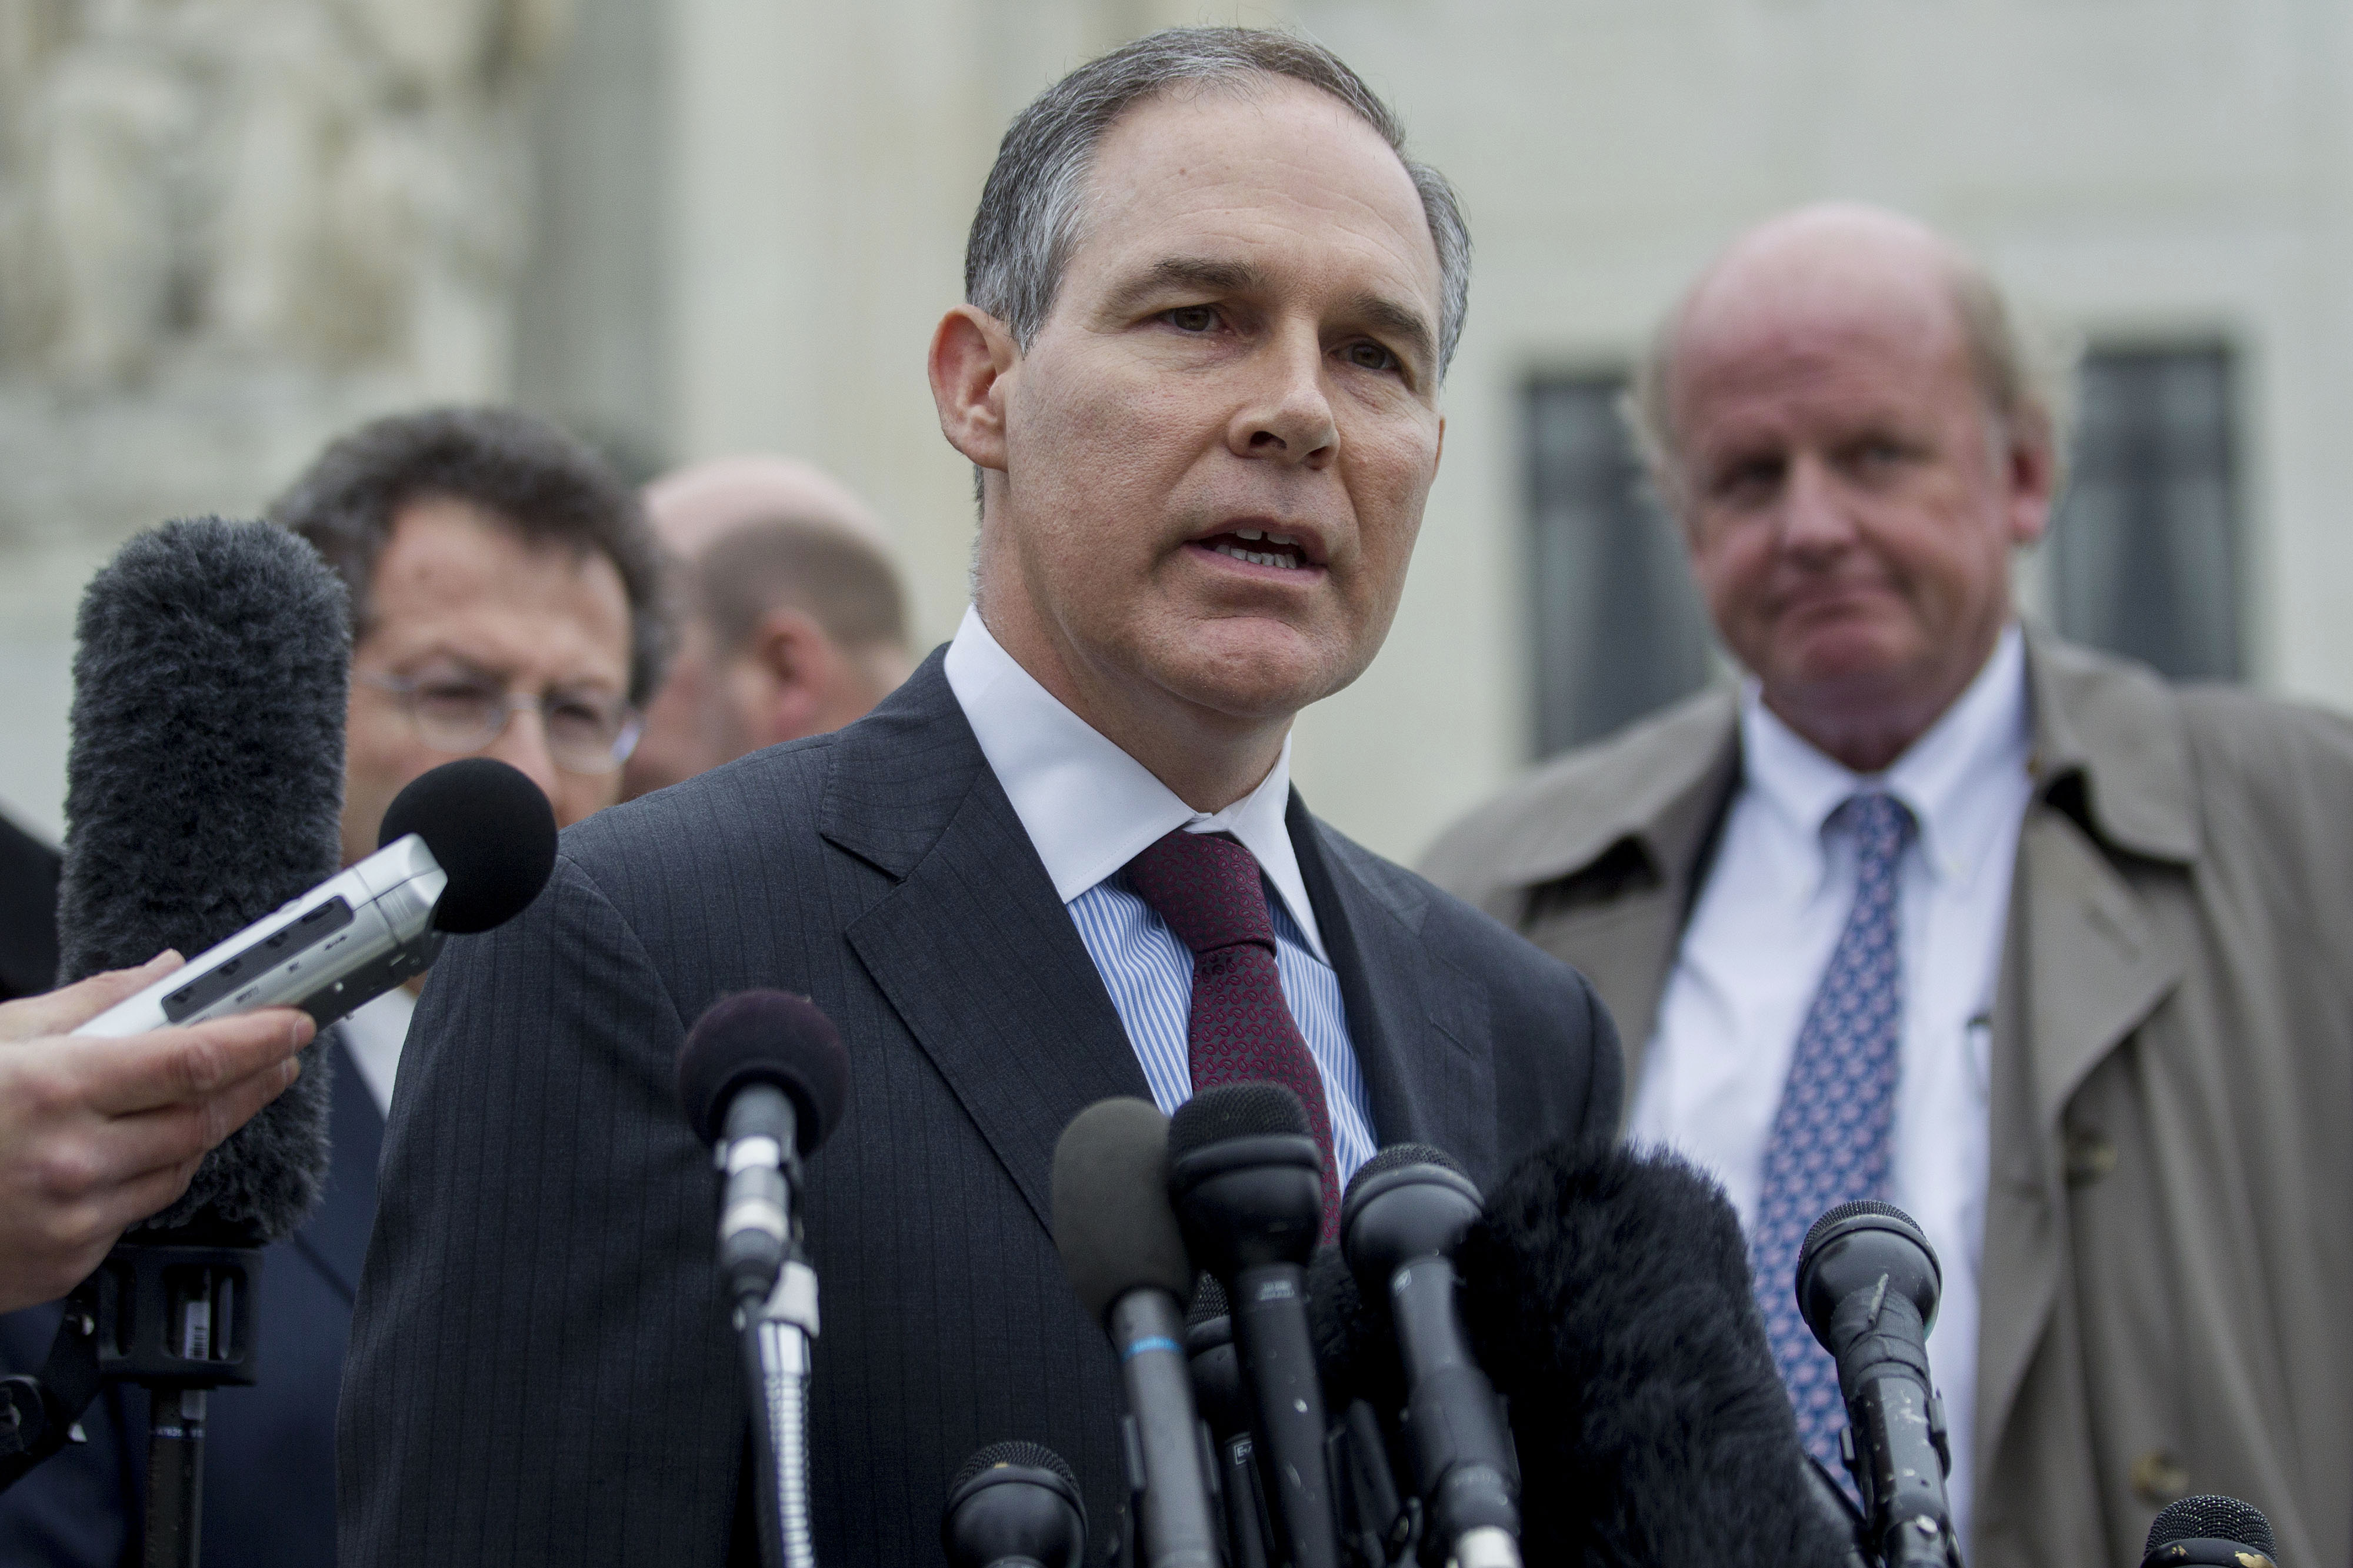 EPA's Heir Apparent, Scott Pruitt, Speaks Out on His Stance to Hot Button Issues WOTUS and RFS